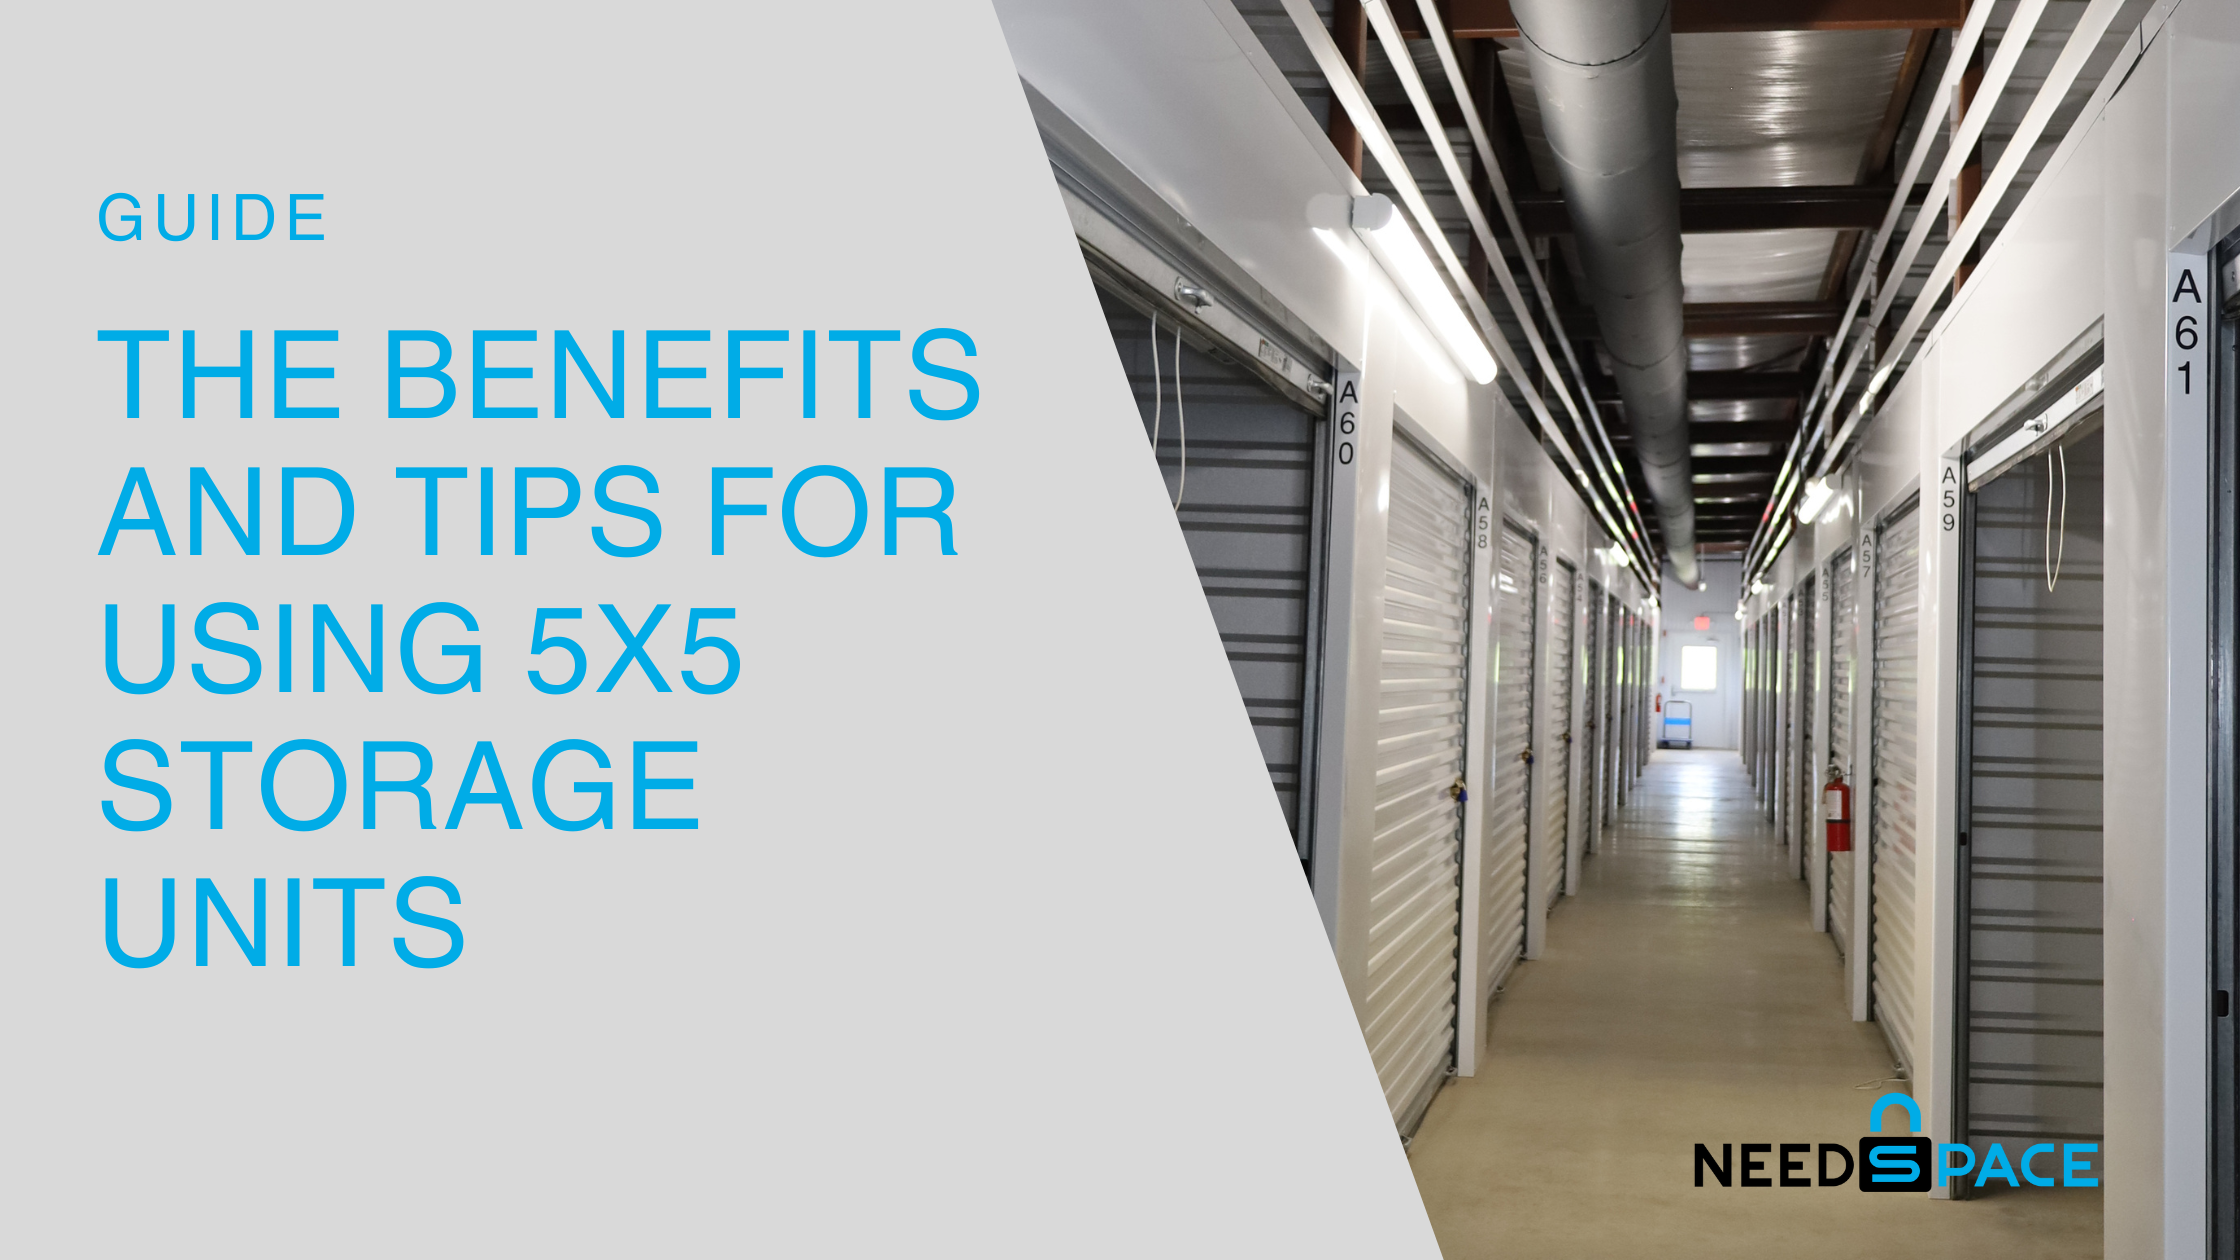 The Benefits and Tips for Using 5x5 Storage Units